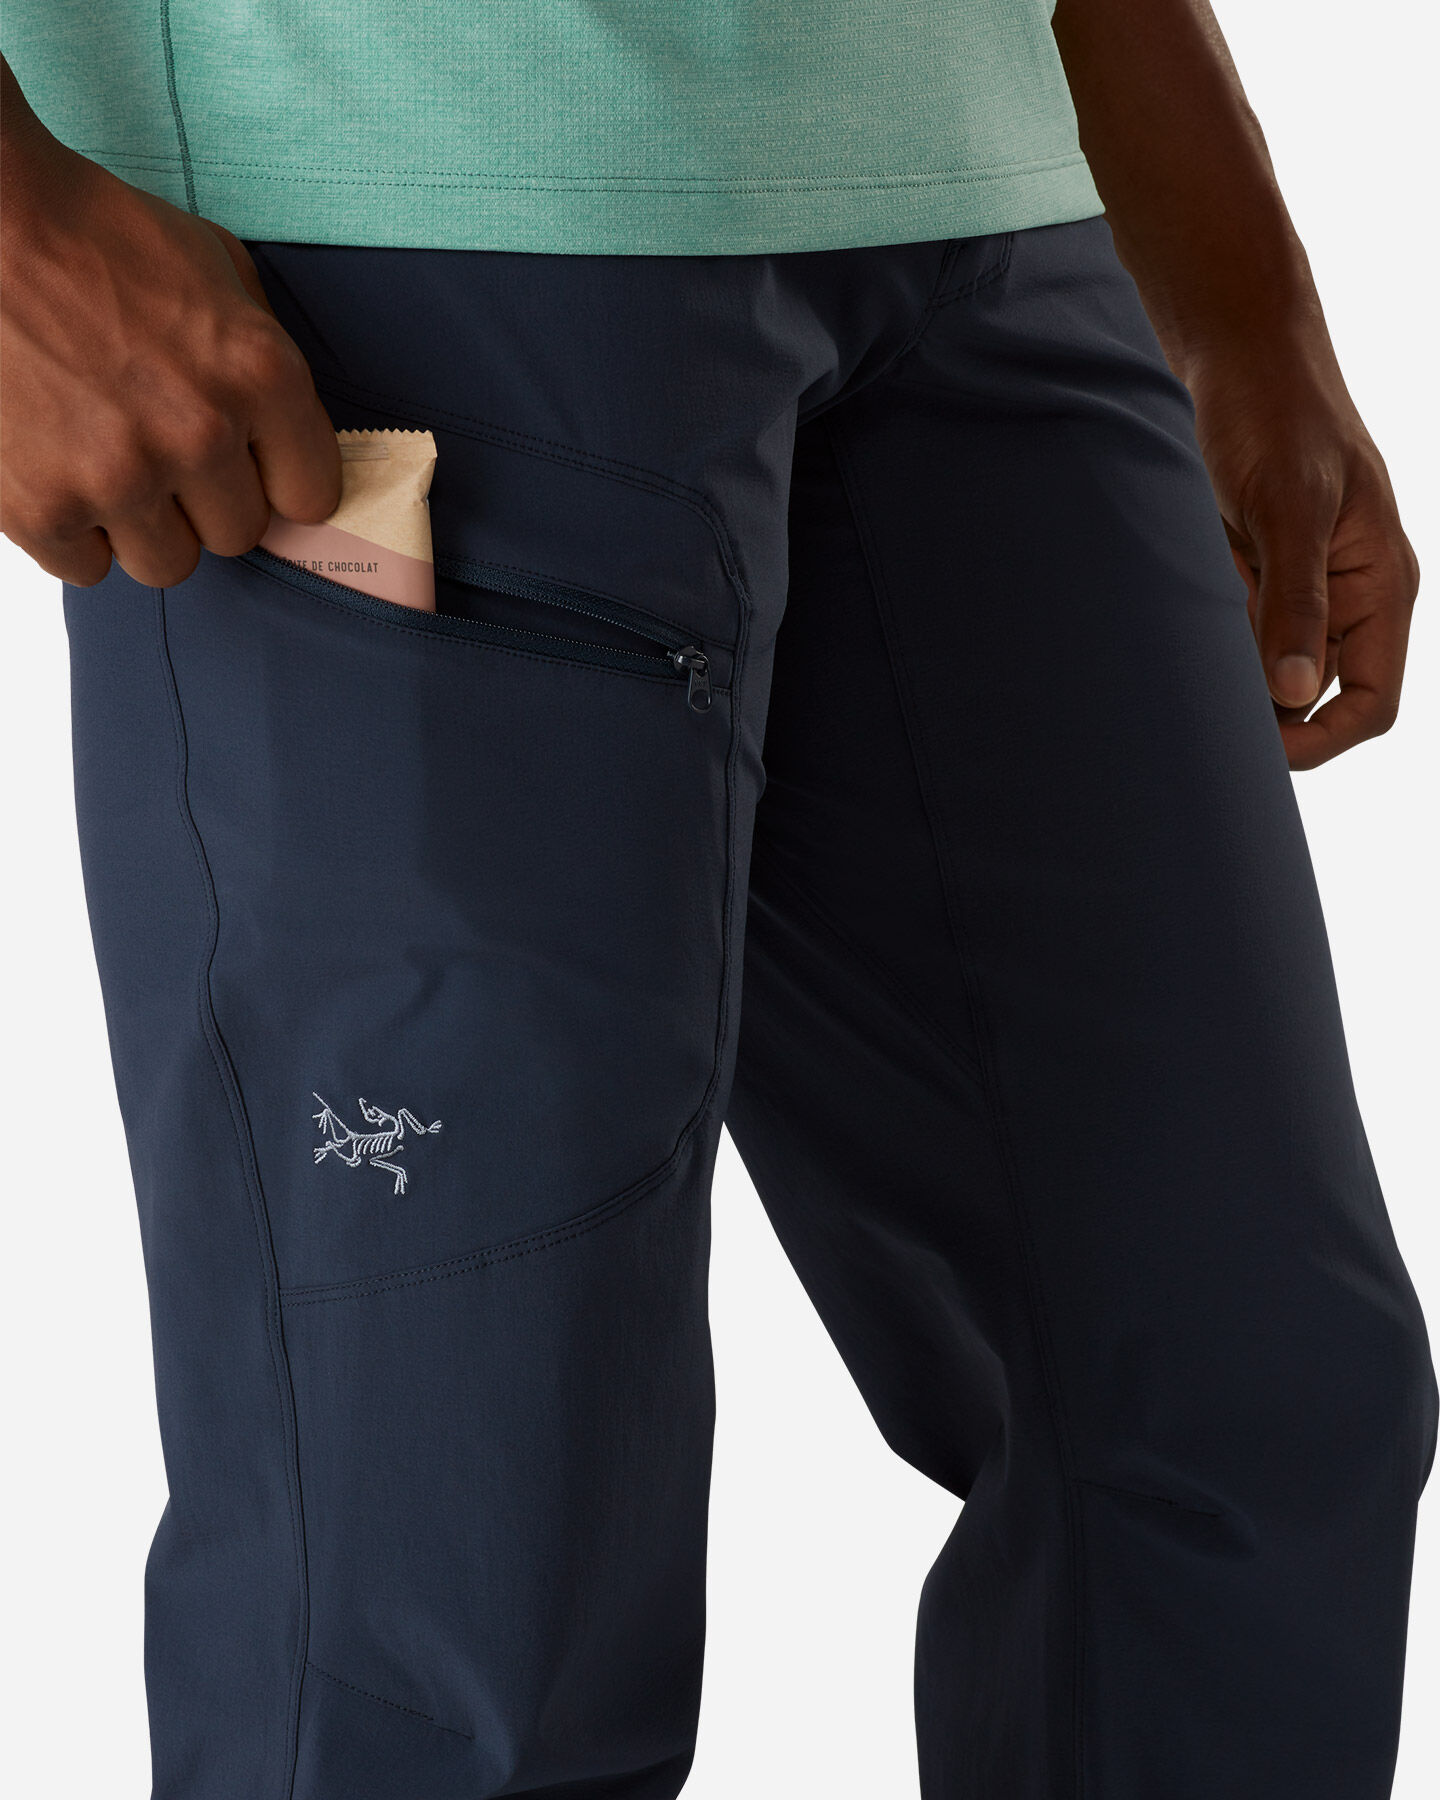  Pantalone outdoor ARC'TERYX LEFROY M S4075199|1|30-32 scatto 3